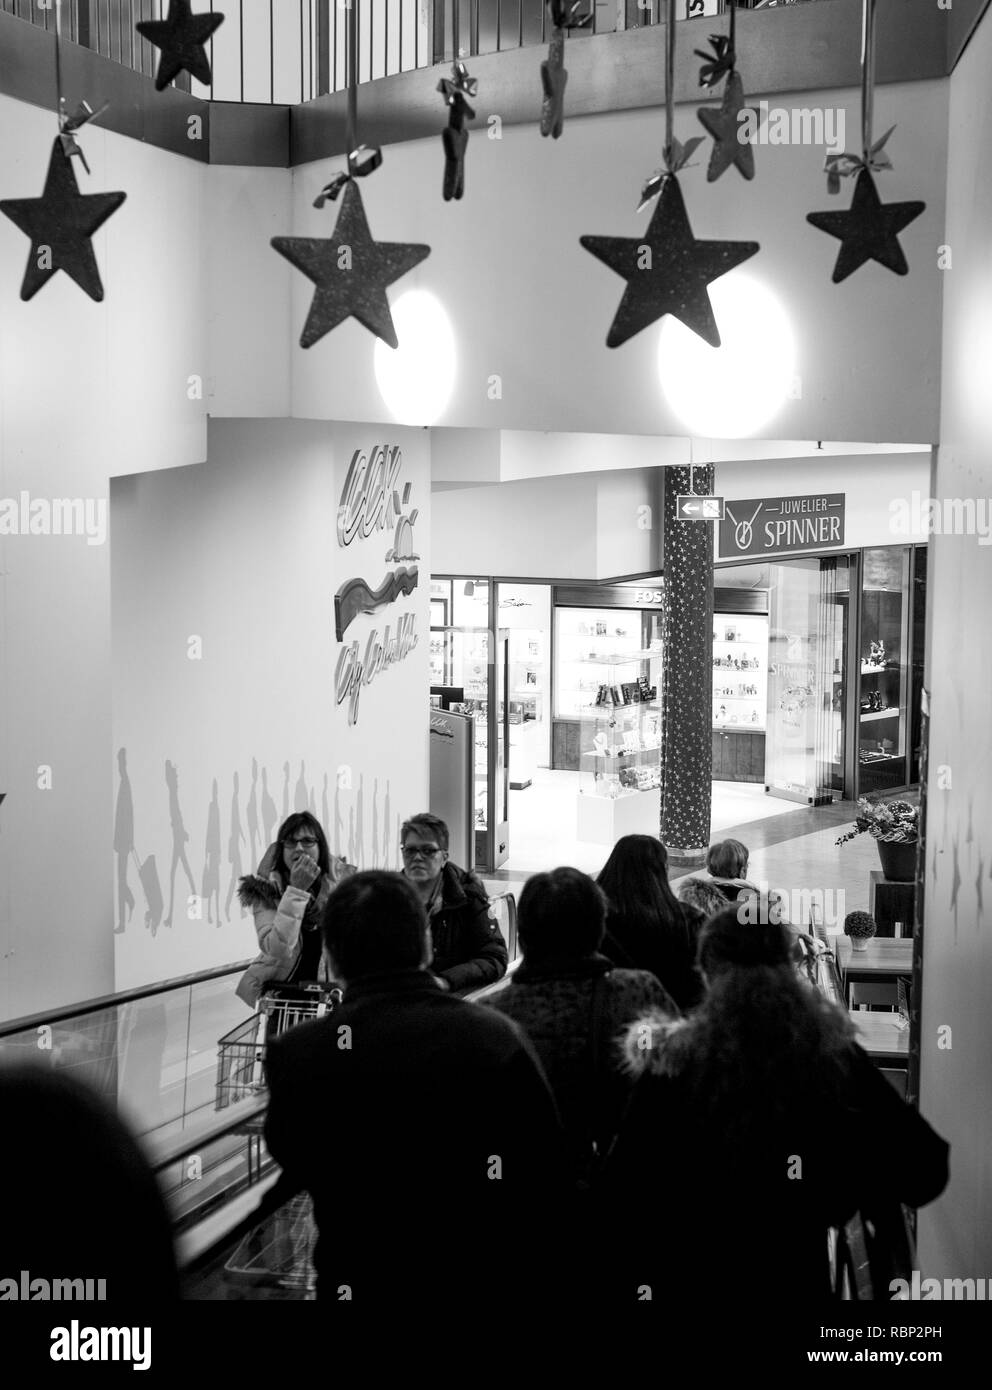 FRANKFURT, GERMANY - DEC 21, 2016: People on escalator with multiple decorations stars above commuting in shopping centre Stock Photo